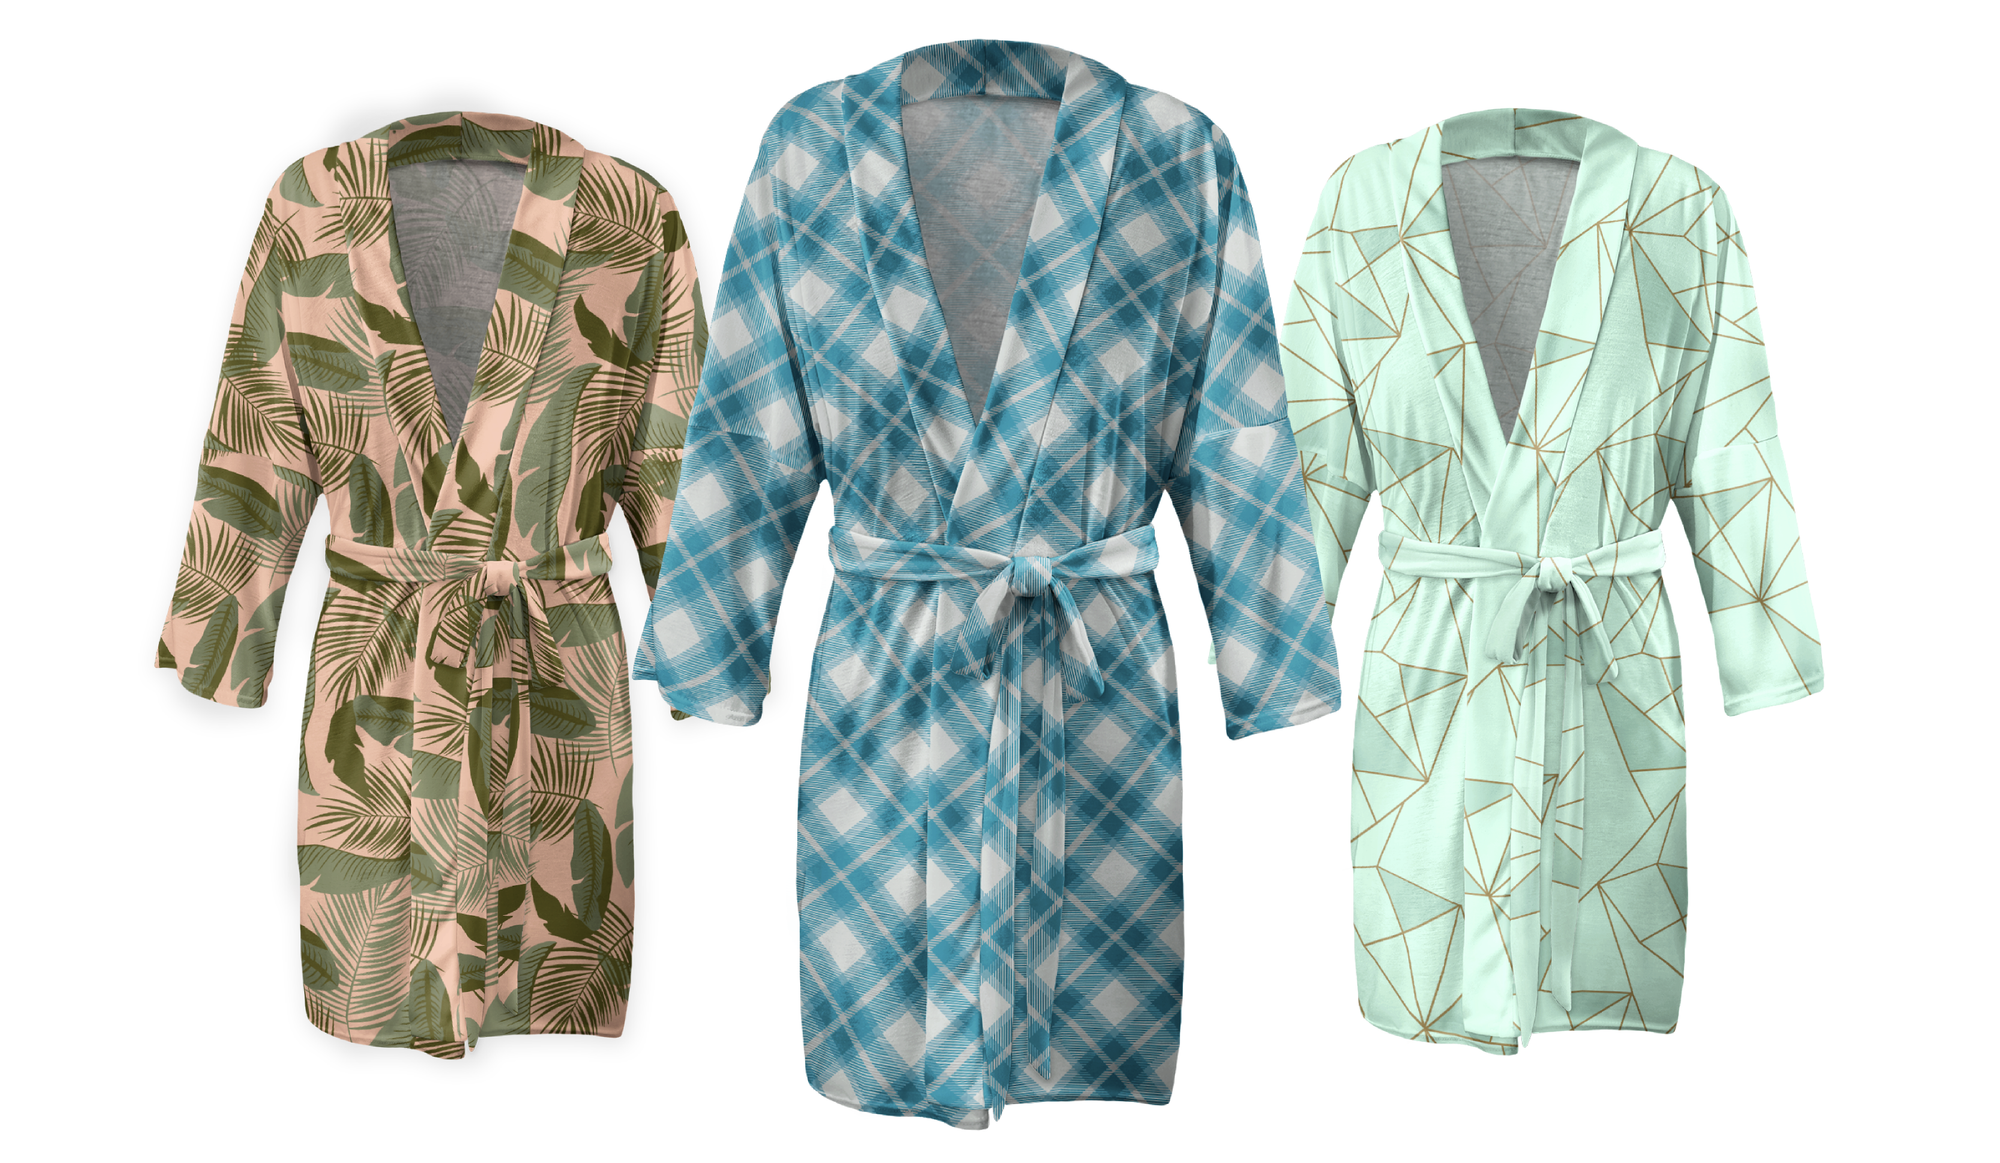 Plaid, floral and geometric print robes in customizable colors